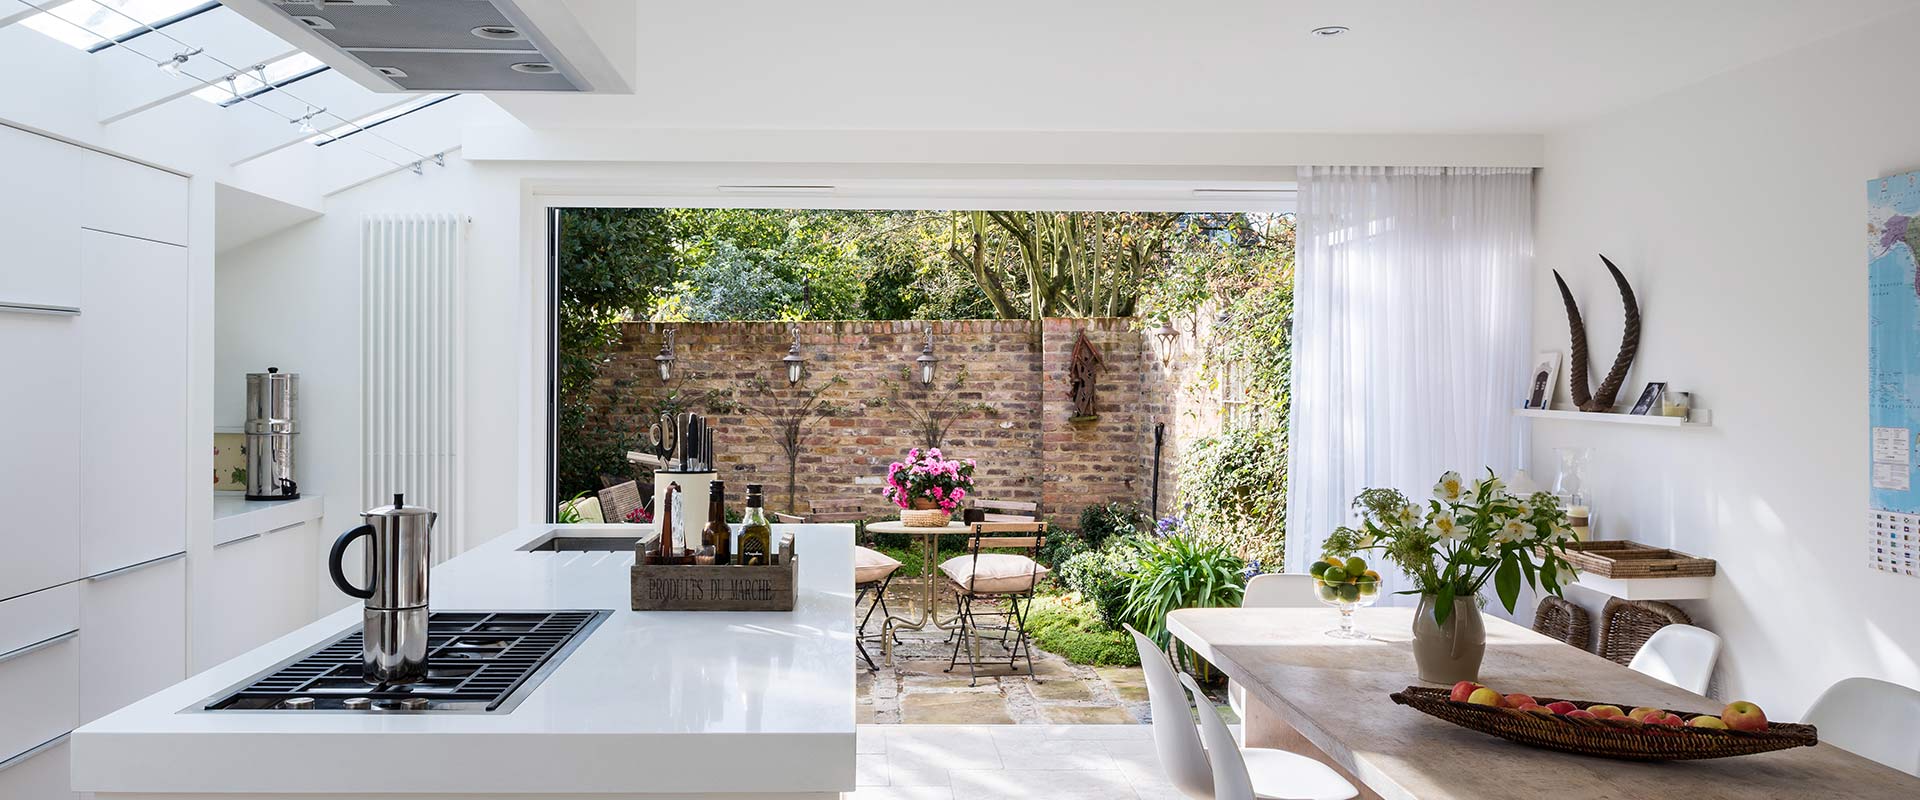 7 Reasons Why Bifold Doors Are a Good Idea for Your Kitchen | Kemphaus